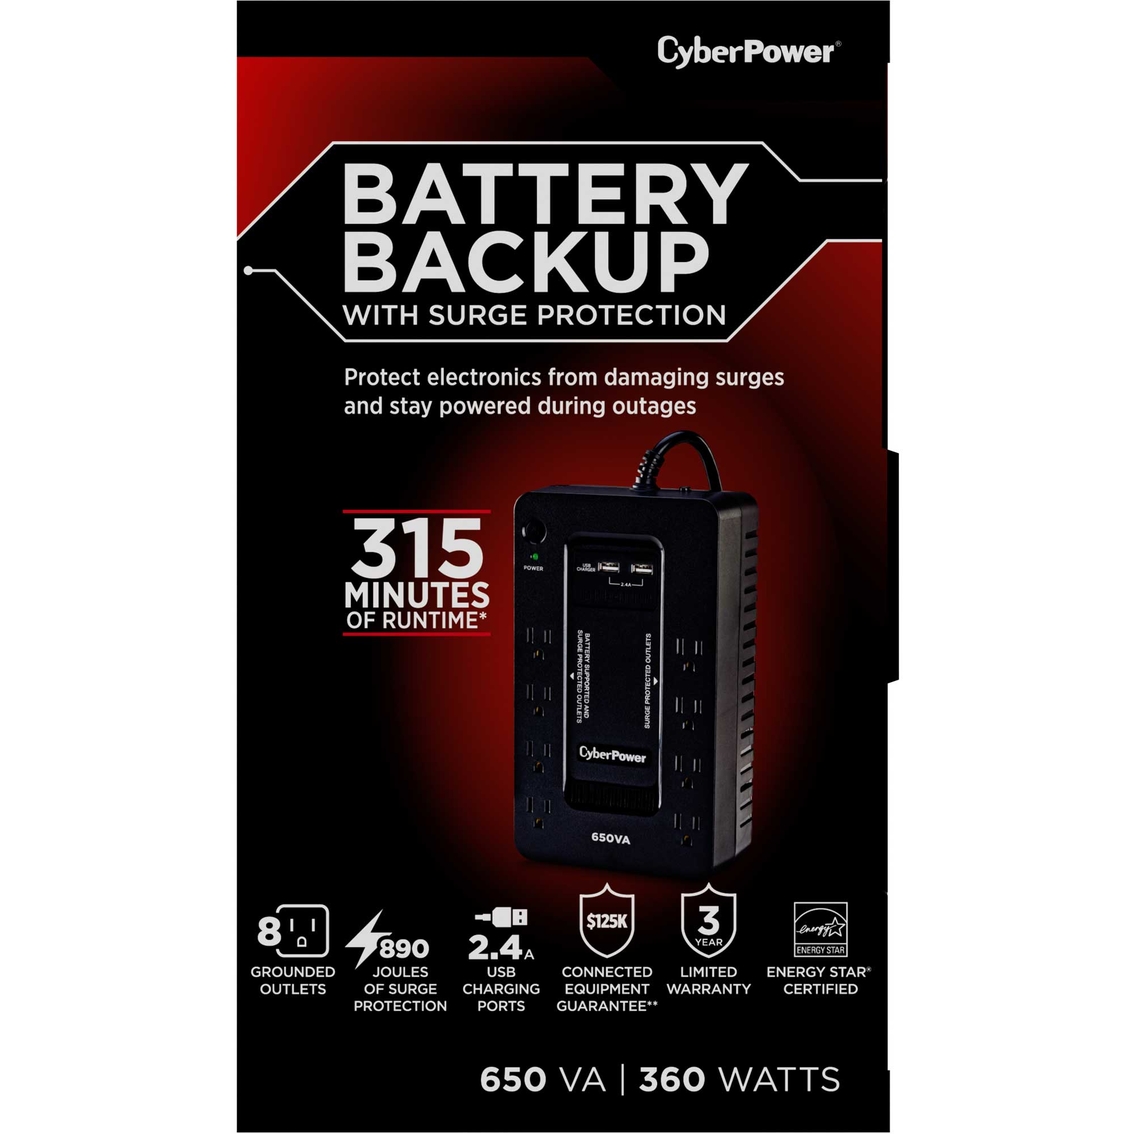 CyberPower 650VA UPS System with 8 Outlets and 2 USB Charging Ports - Image 5 of 7